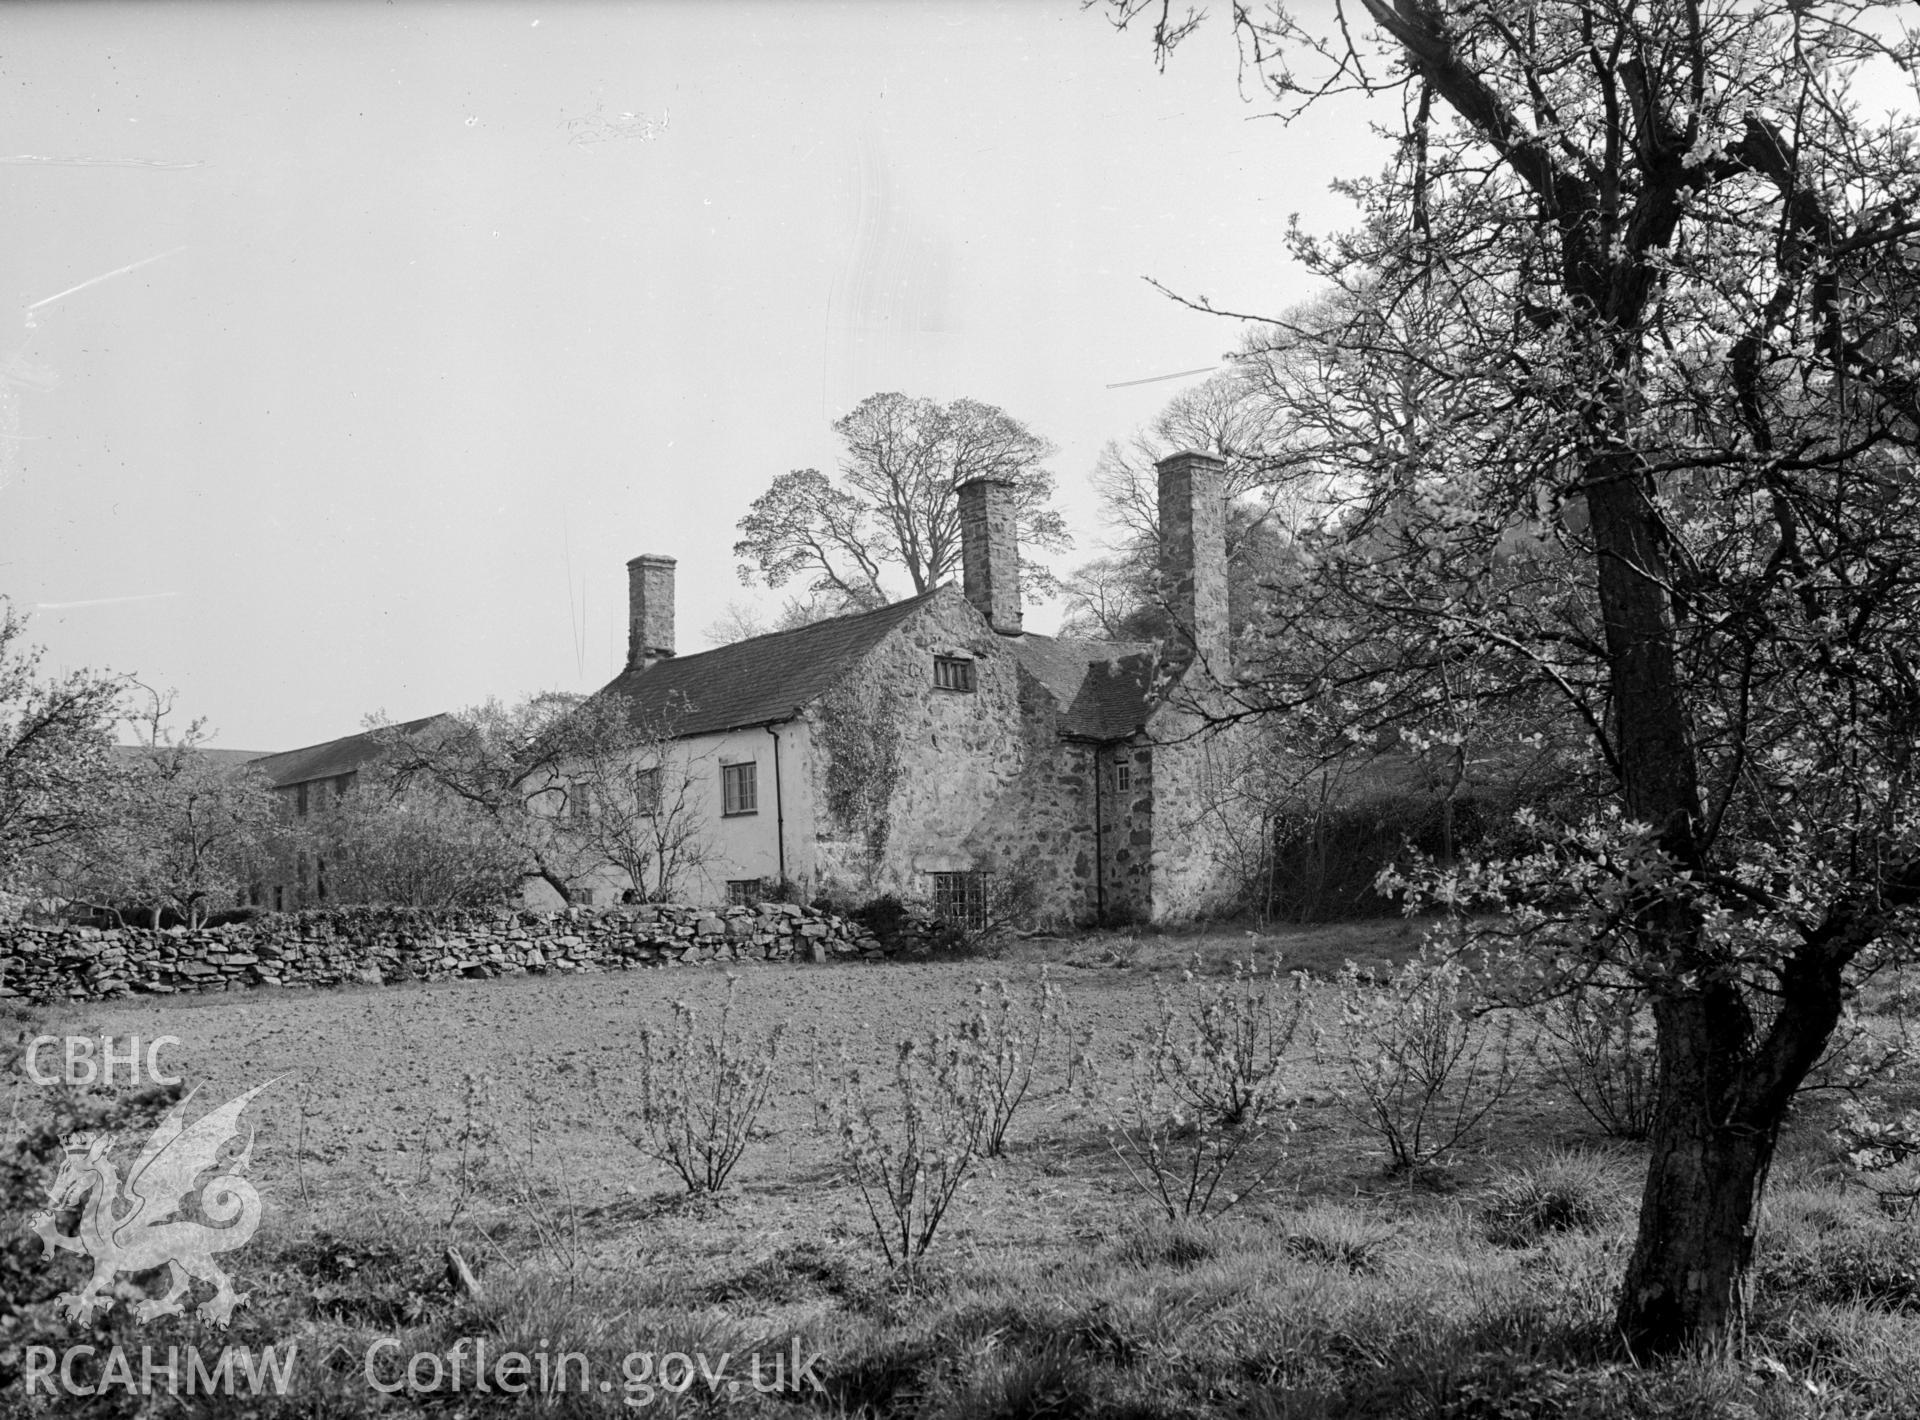 A photograph of a 17th century two storey stone manor house, with pitched roofing.